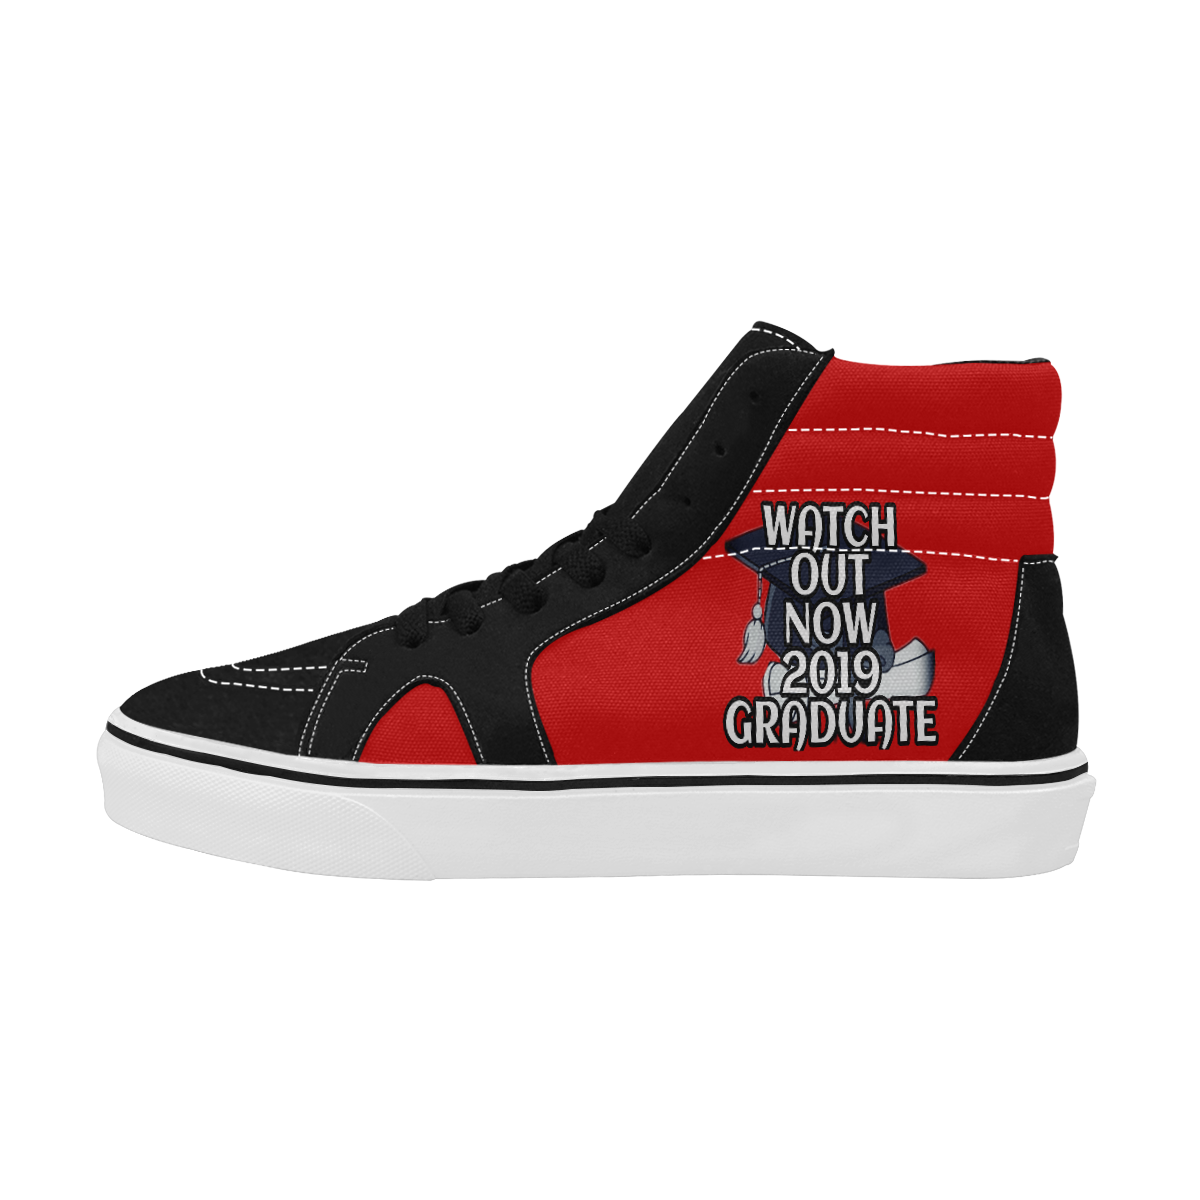 Watch Out Now 2019 Graduate Women's High Top Skateboarding Shoes/Large (Model E001-1)